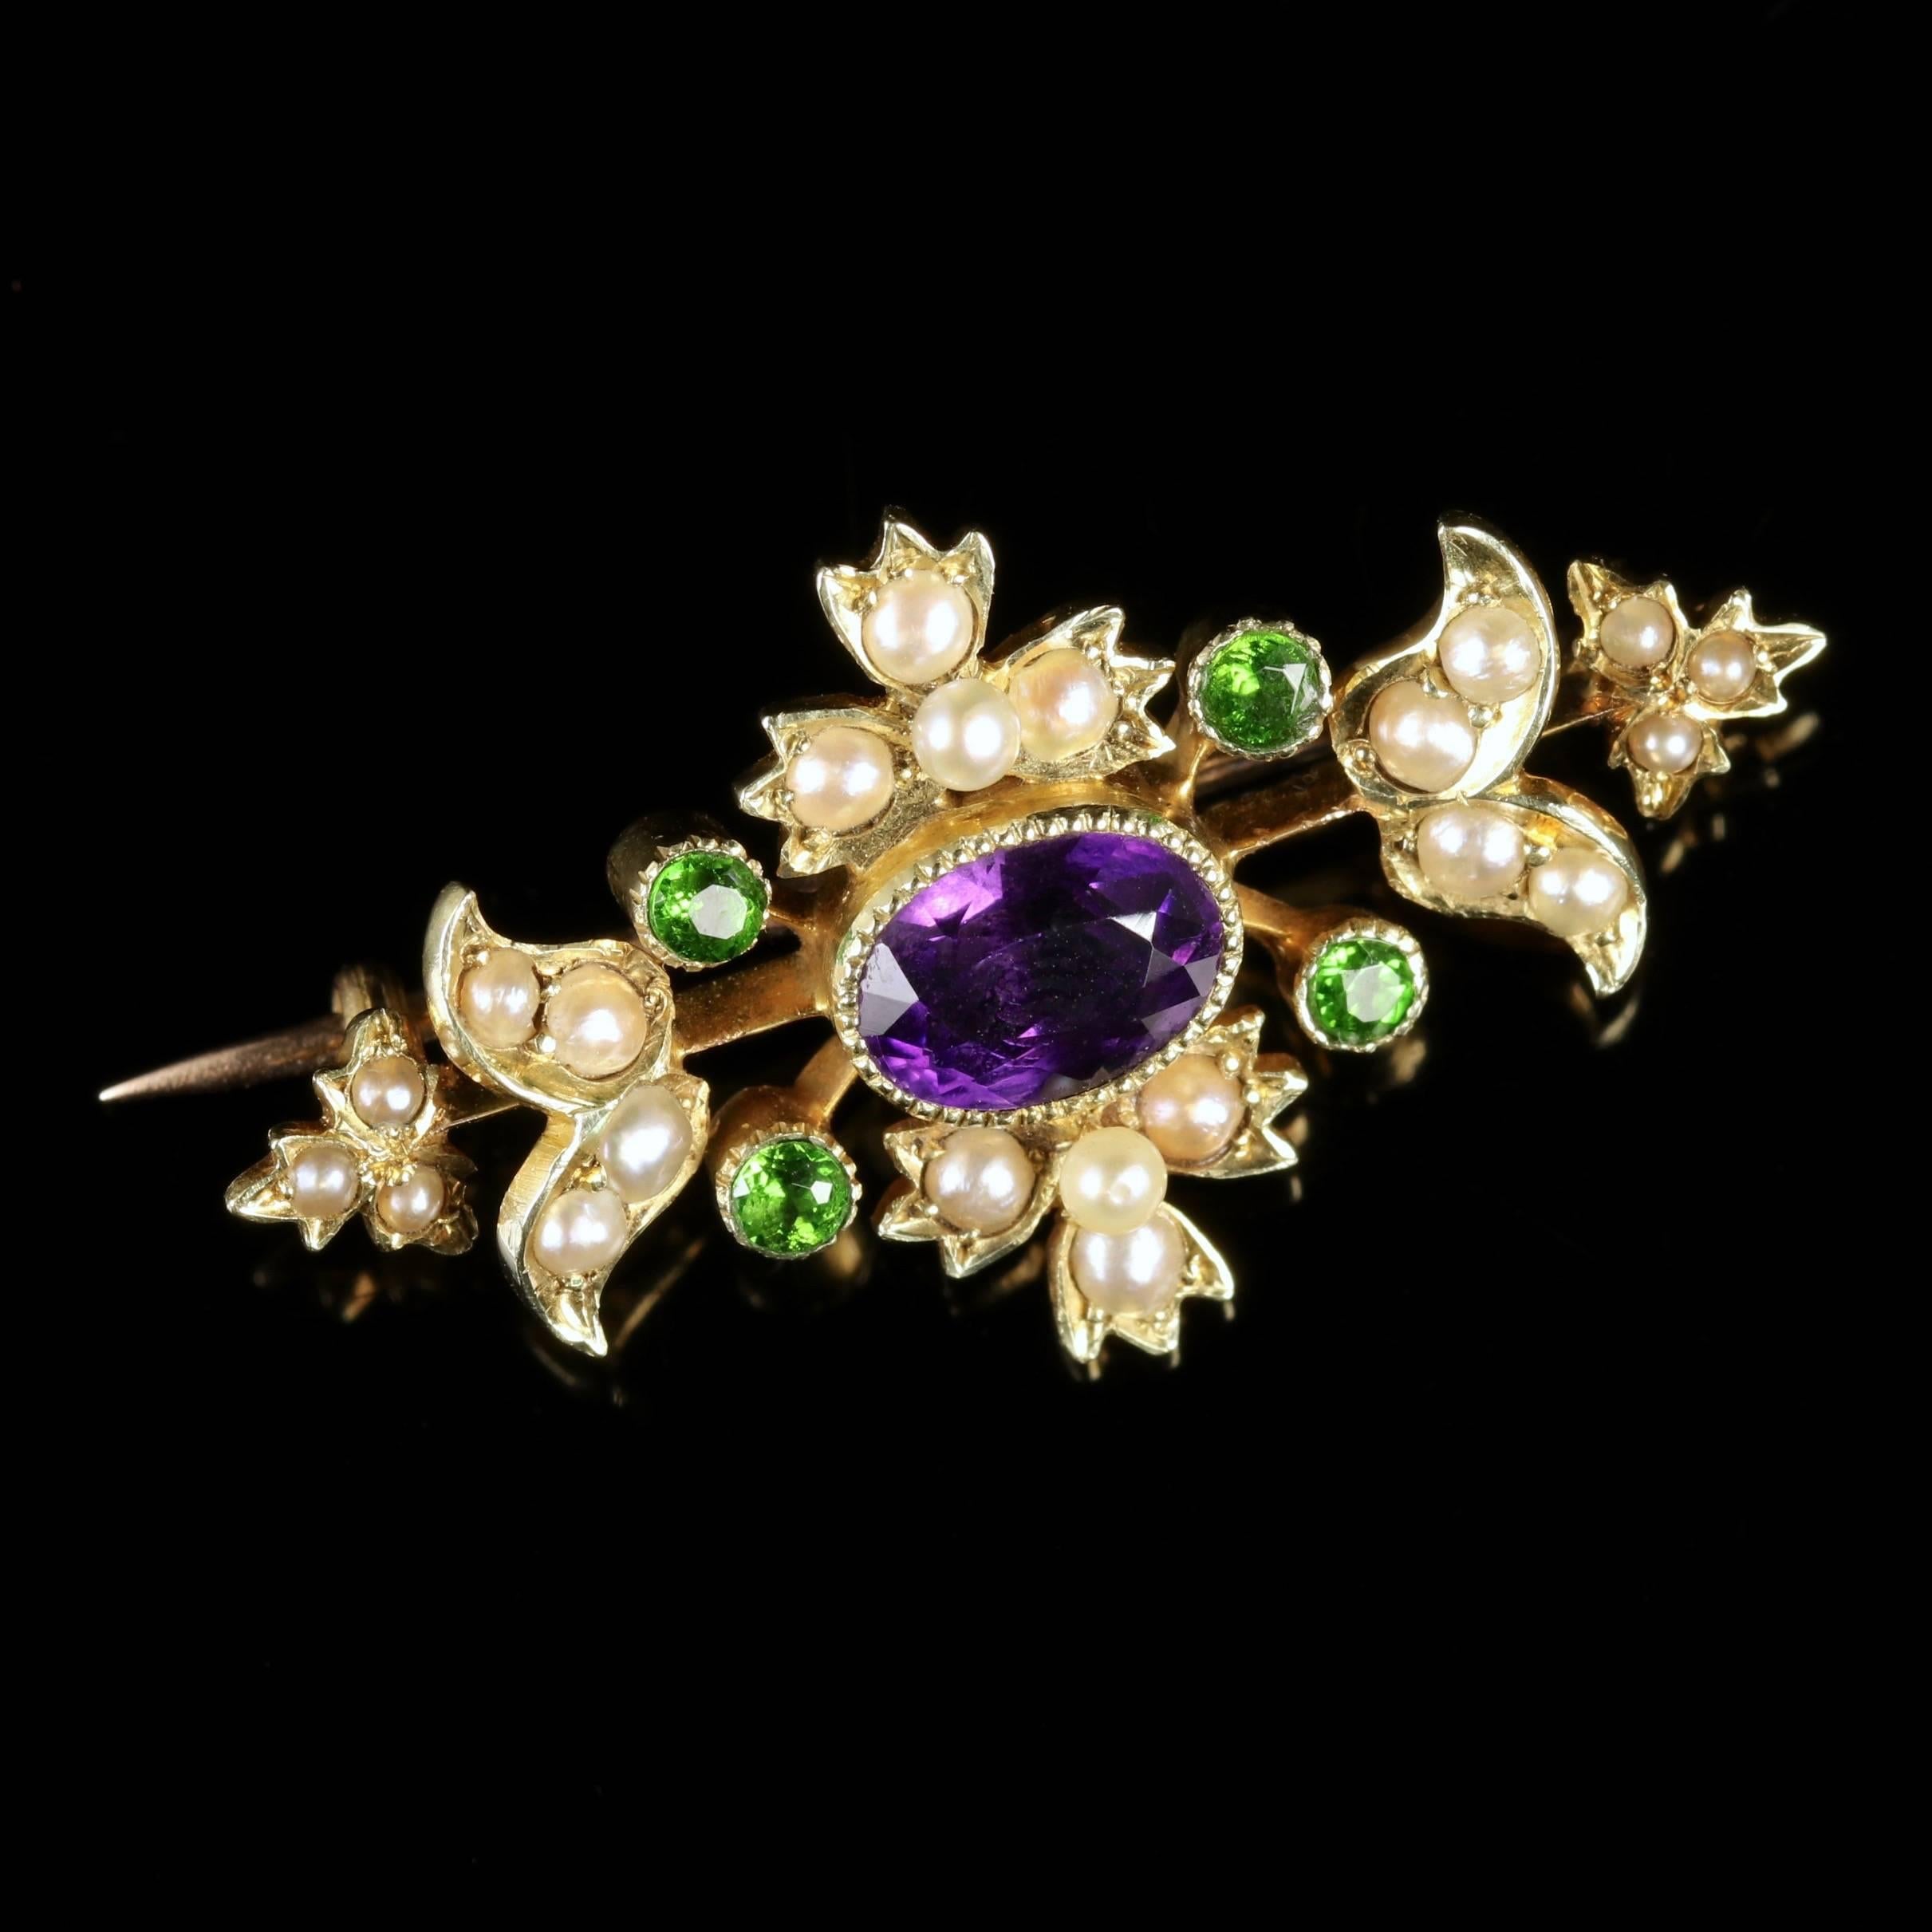 This lovely antique Victorian brooch was made representing the Suffragette movement, Circa 1900. 

Suffragettes liked to be depicted as feminine, their jewellery popularly consisted of Violet, Green and White colours which were chosen to counter the